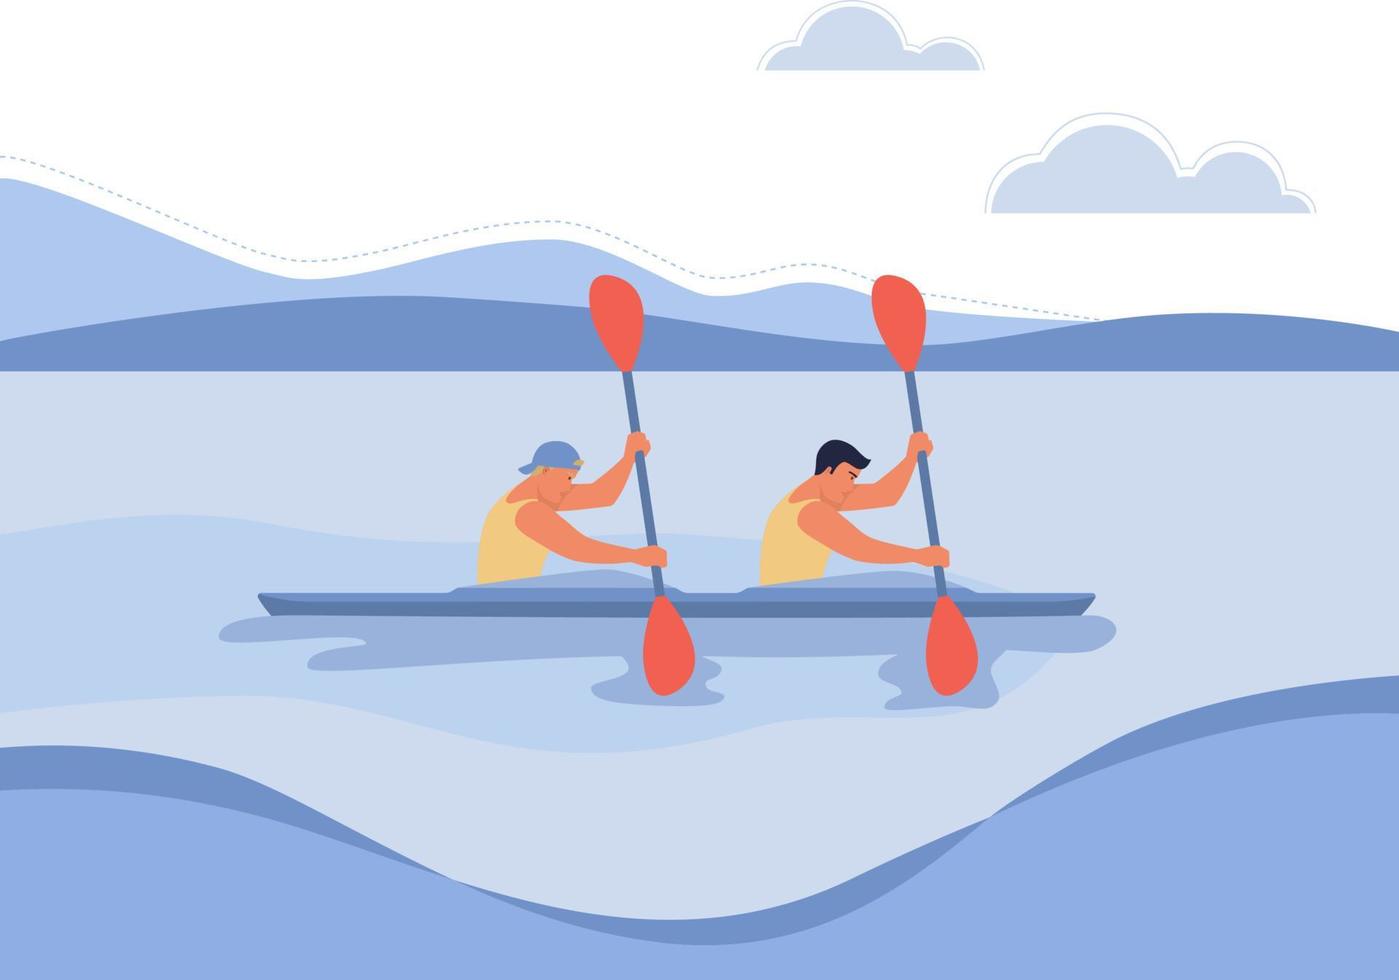 Two guys in a boat are floating on the river, the concept of rowing competitions, canoeing. Vector illustration in a flat style.